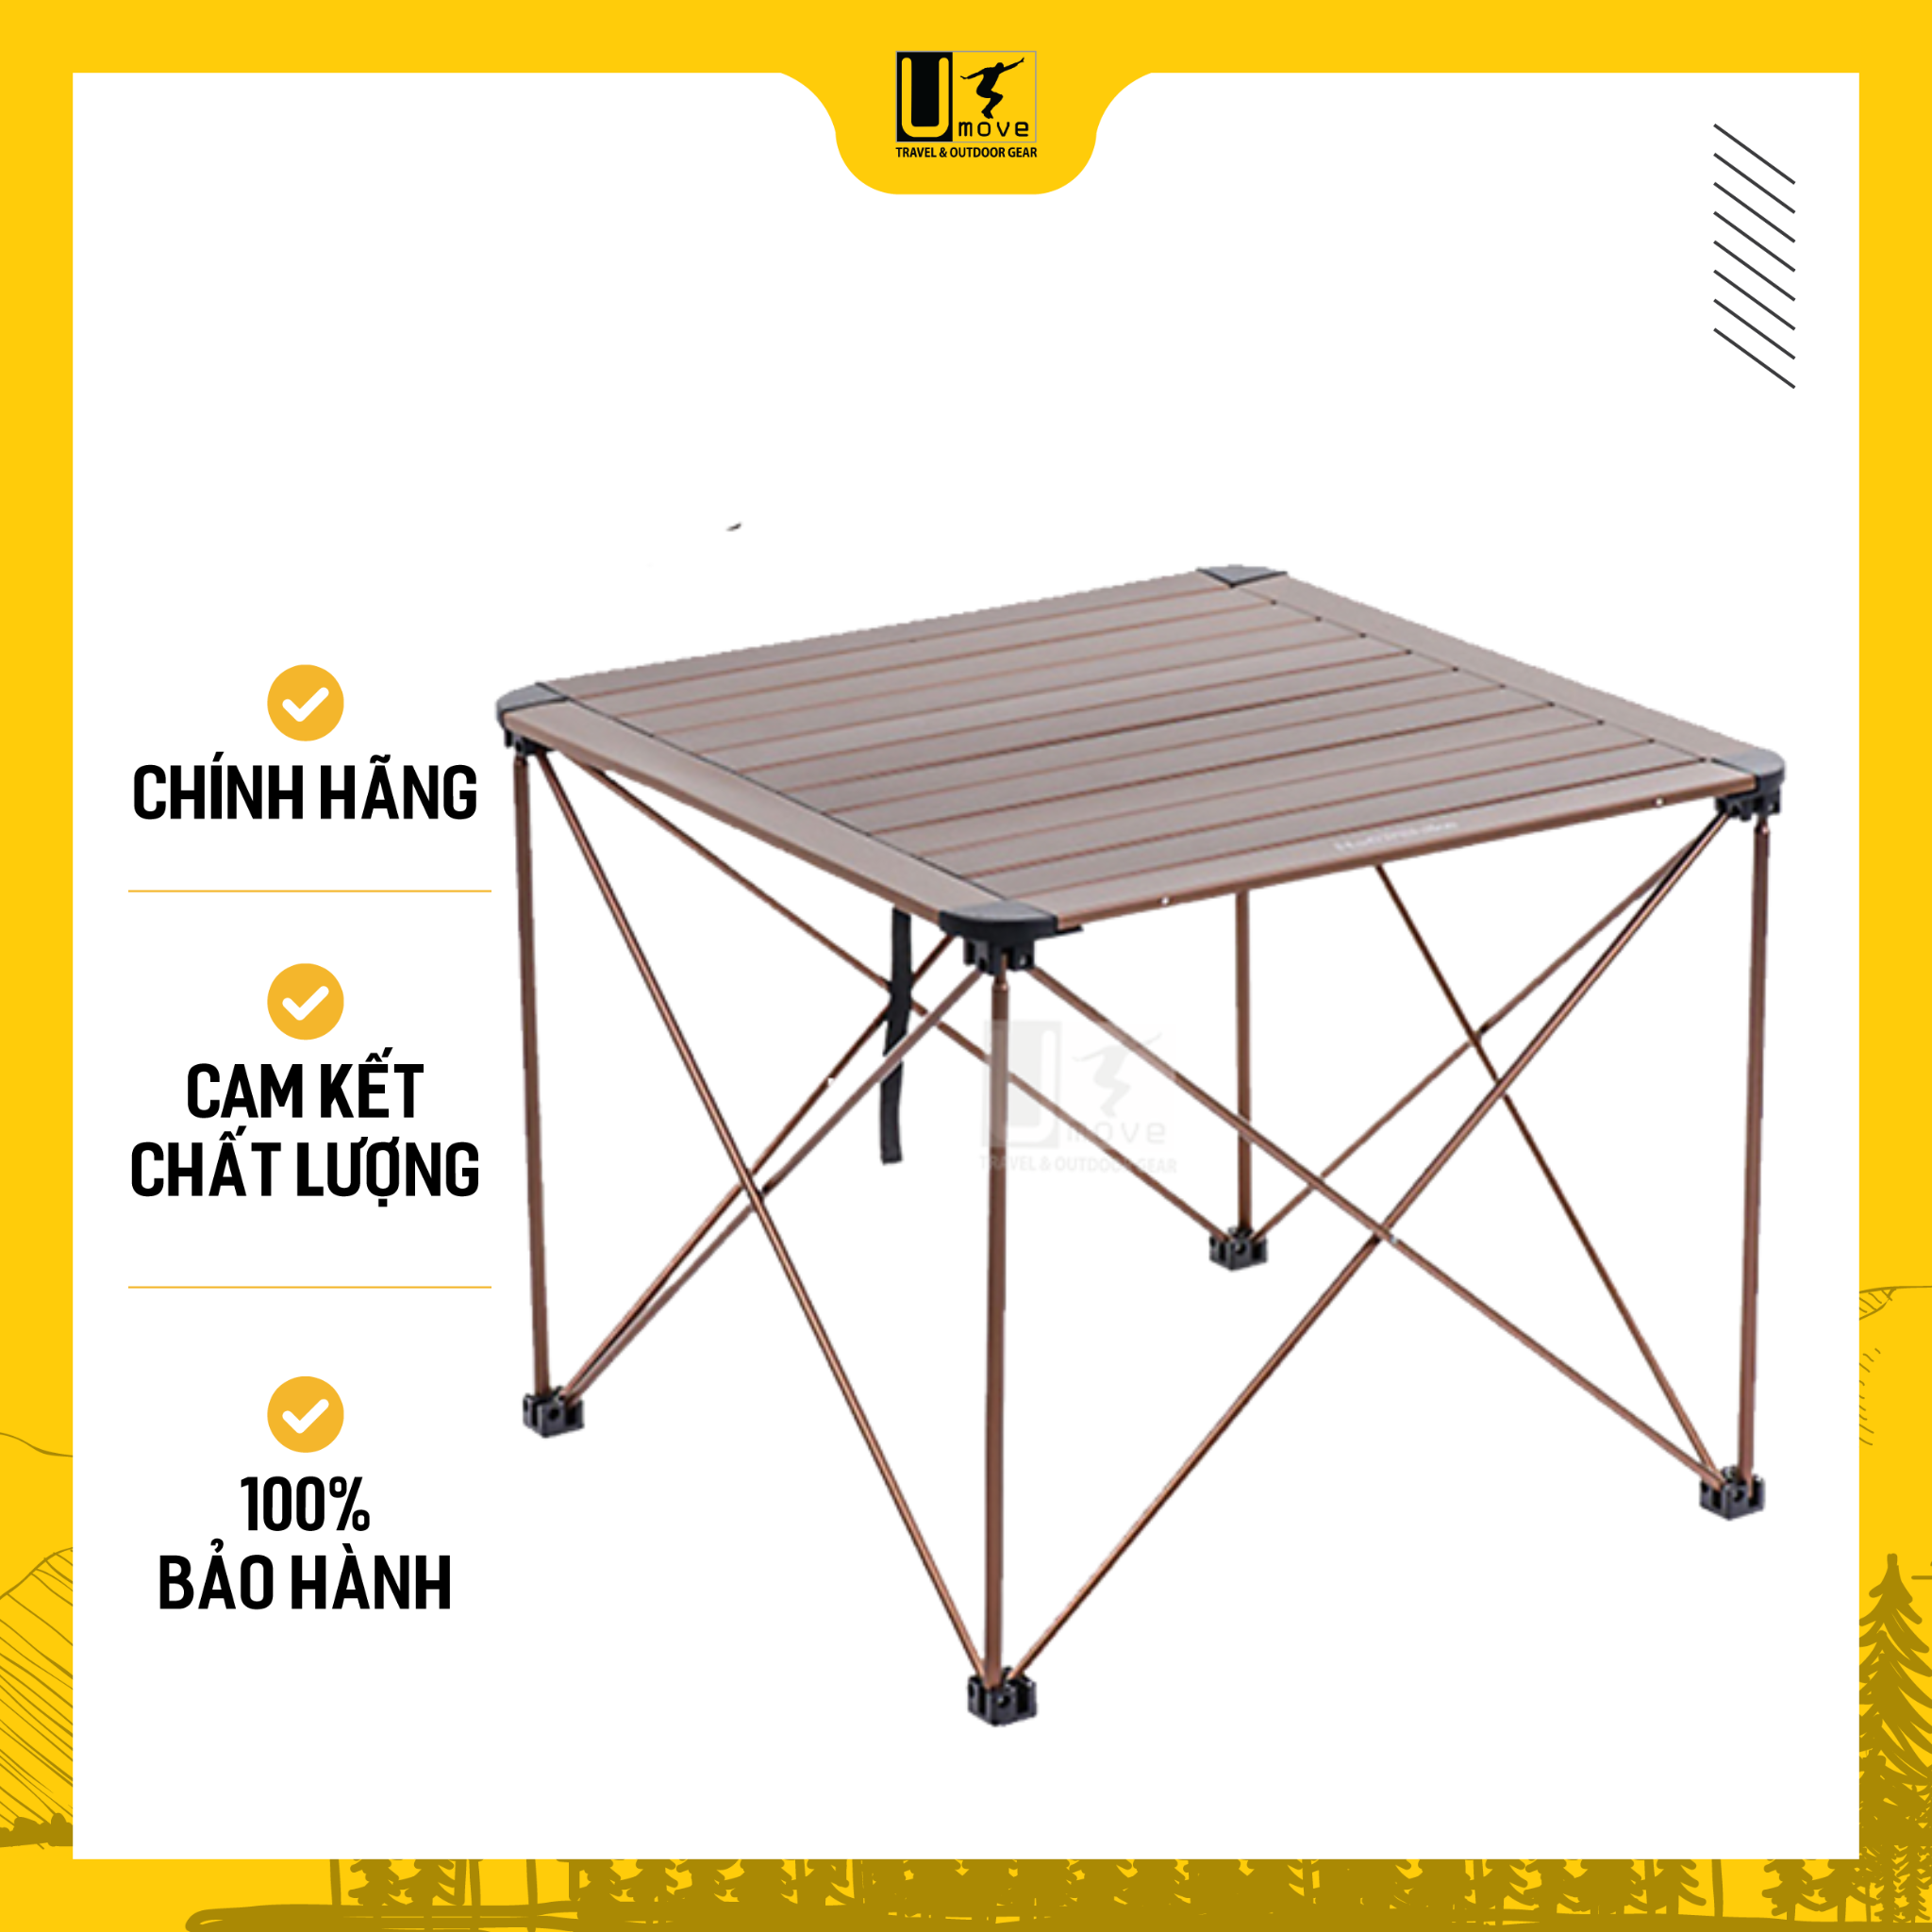 Naturehike aluminum frame foldable picnic table lc16z016-l Bown Brown Grey